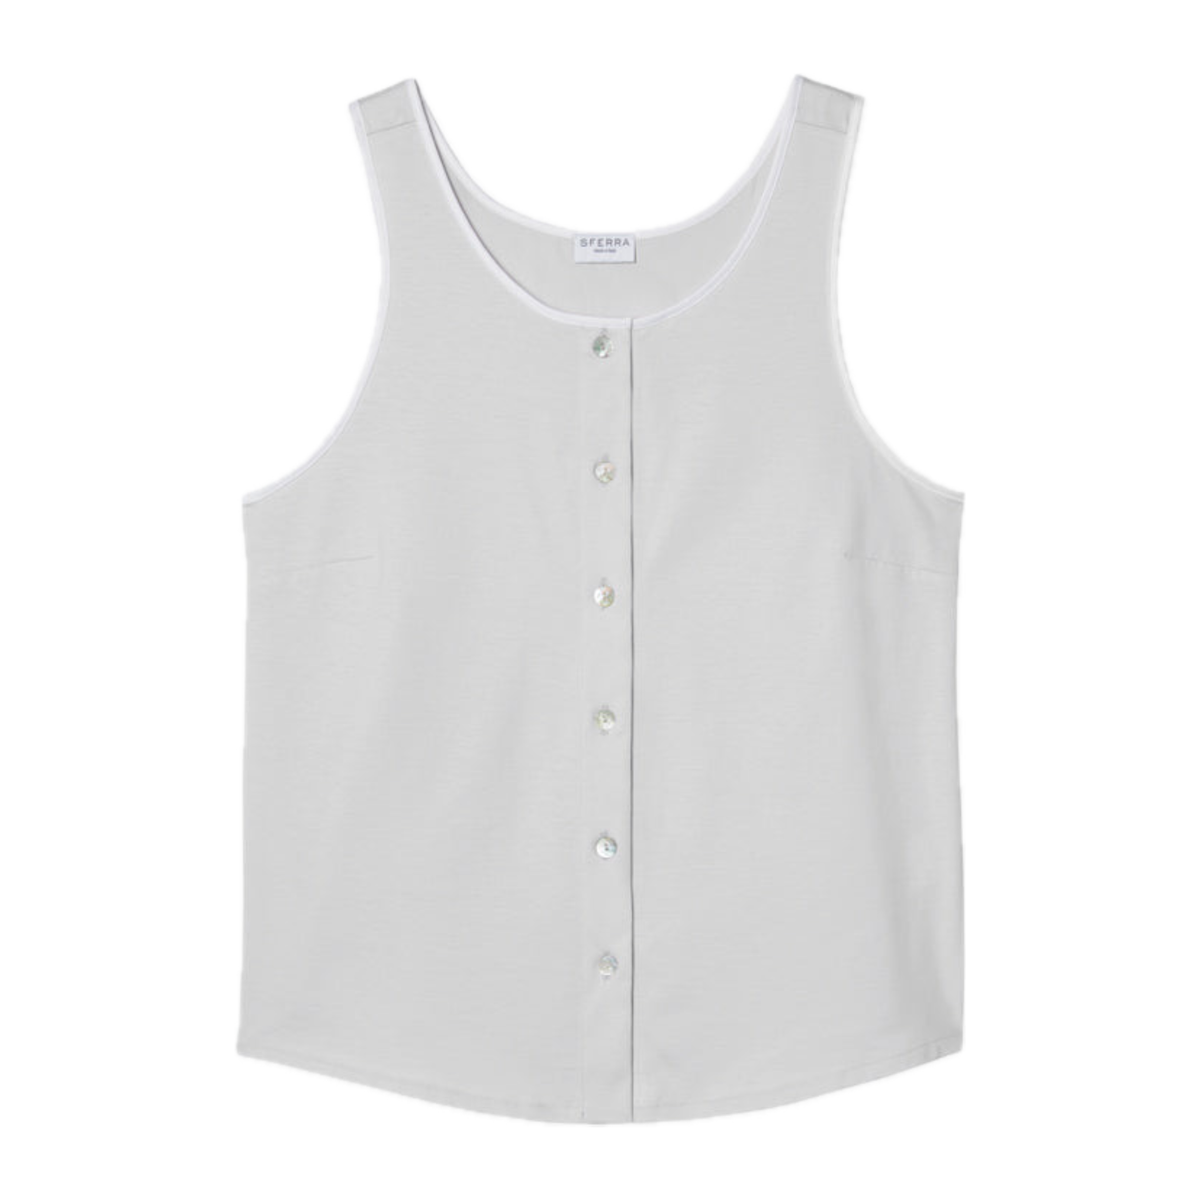 Tin Sferra Caricia Buttoned Tank Top against a white background